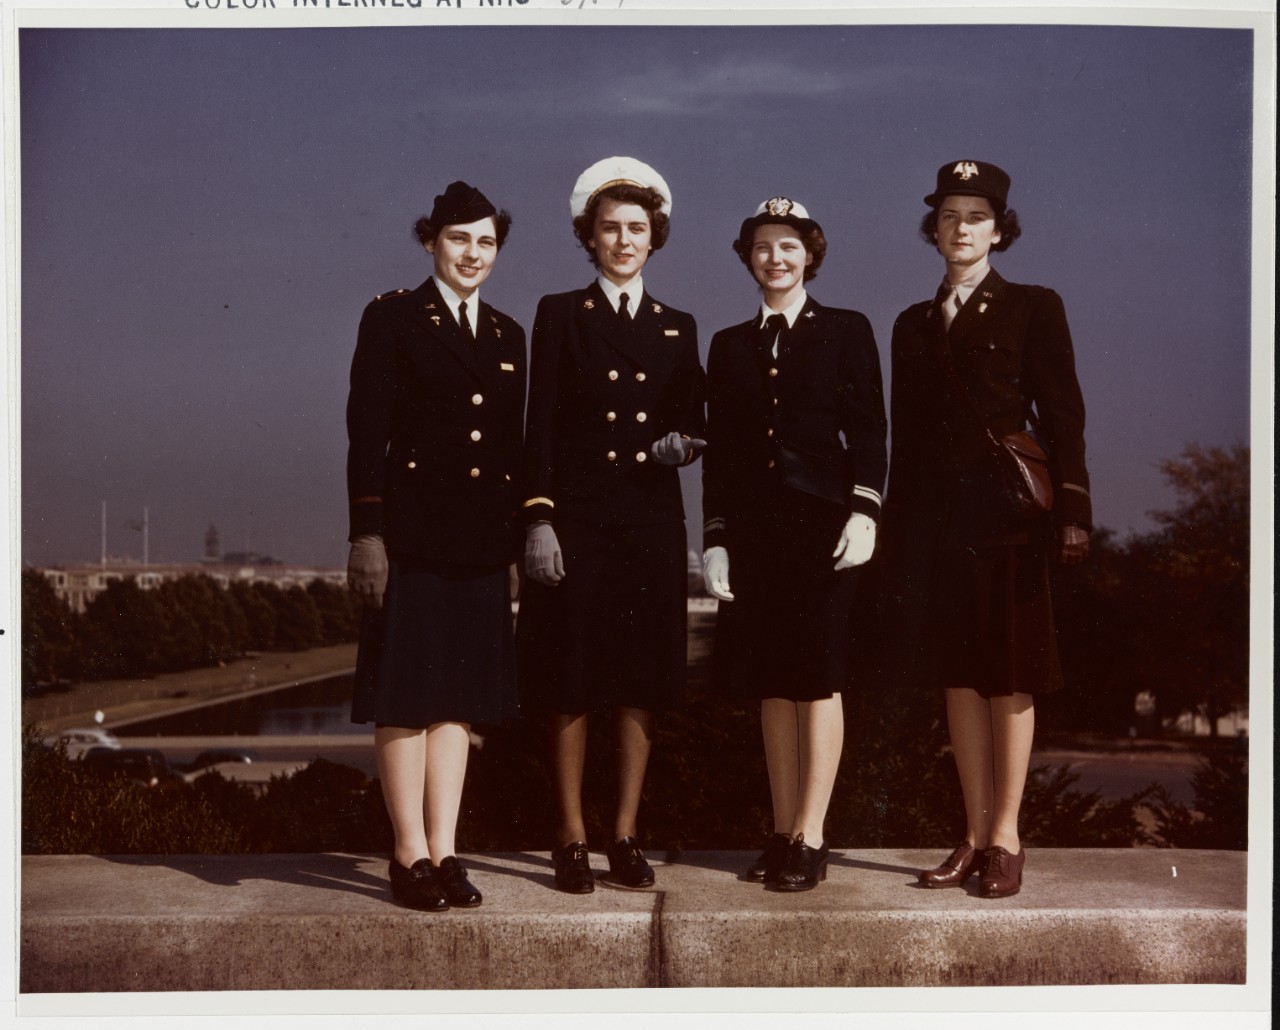 Women Officers of the armed forces, circa 1942-43.